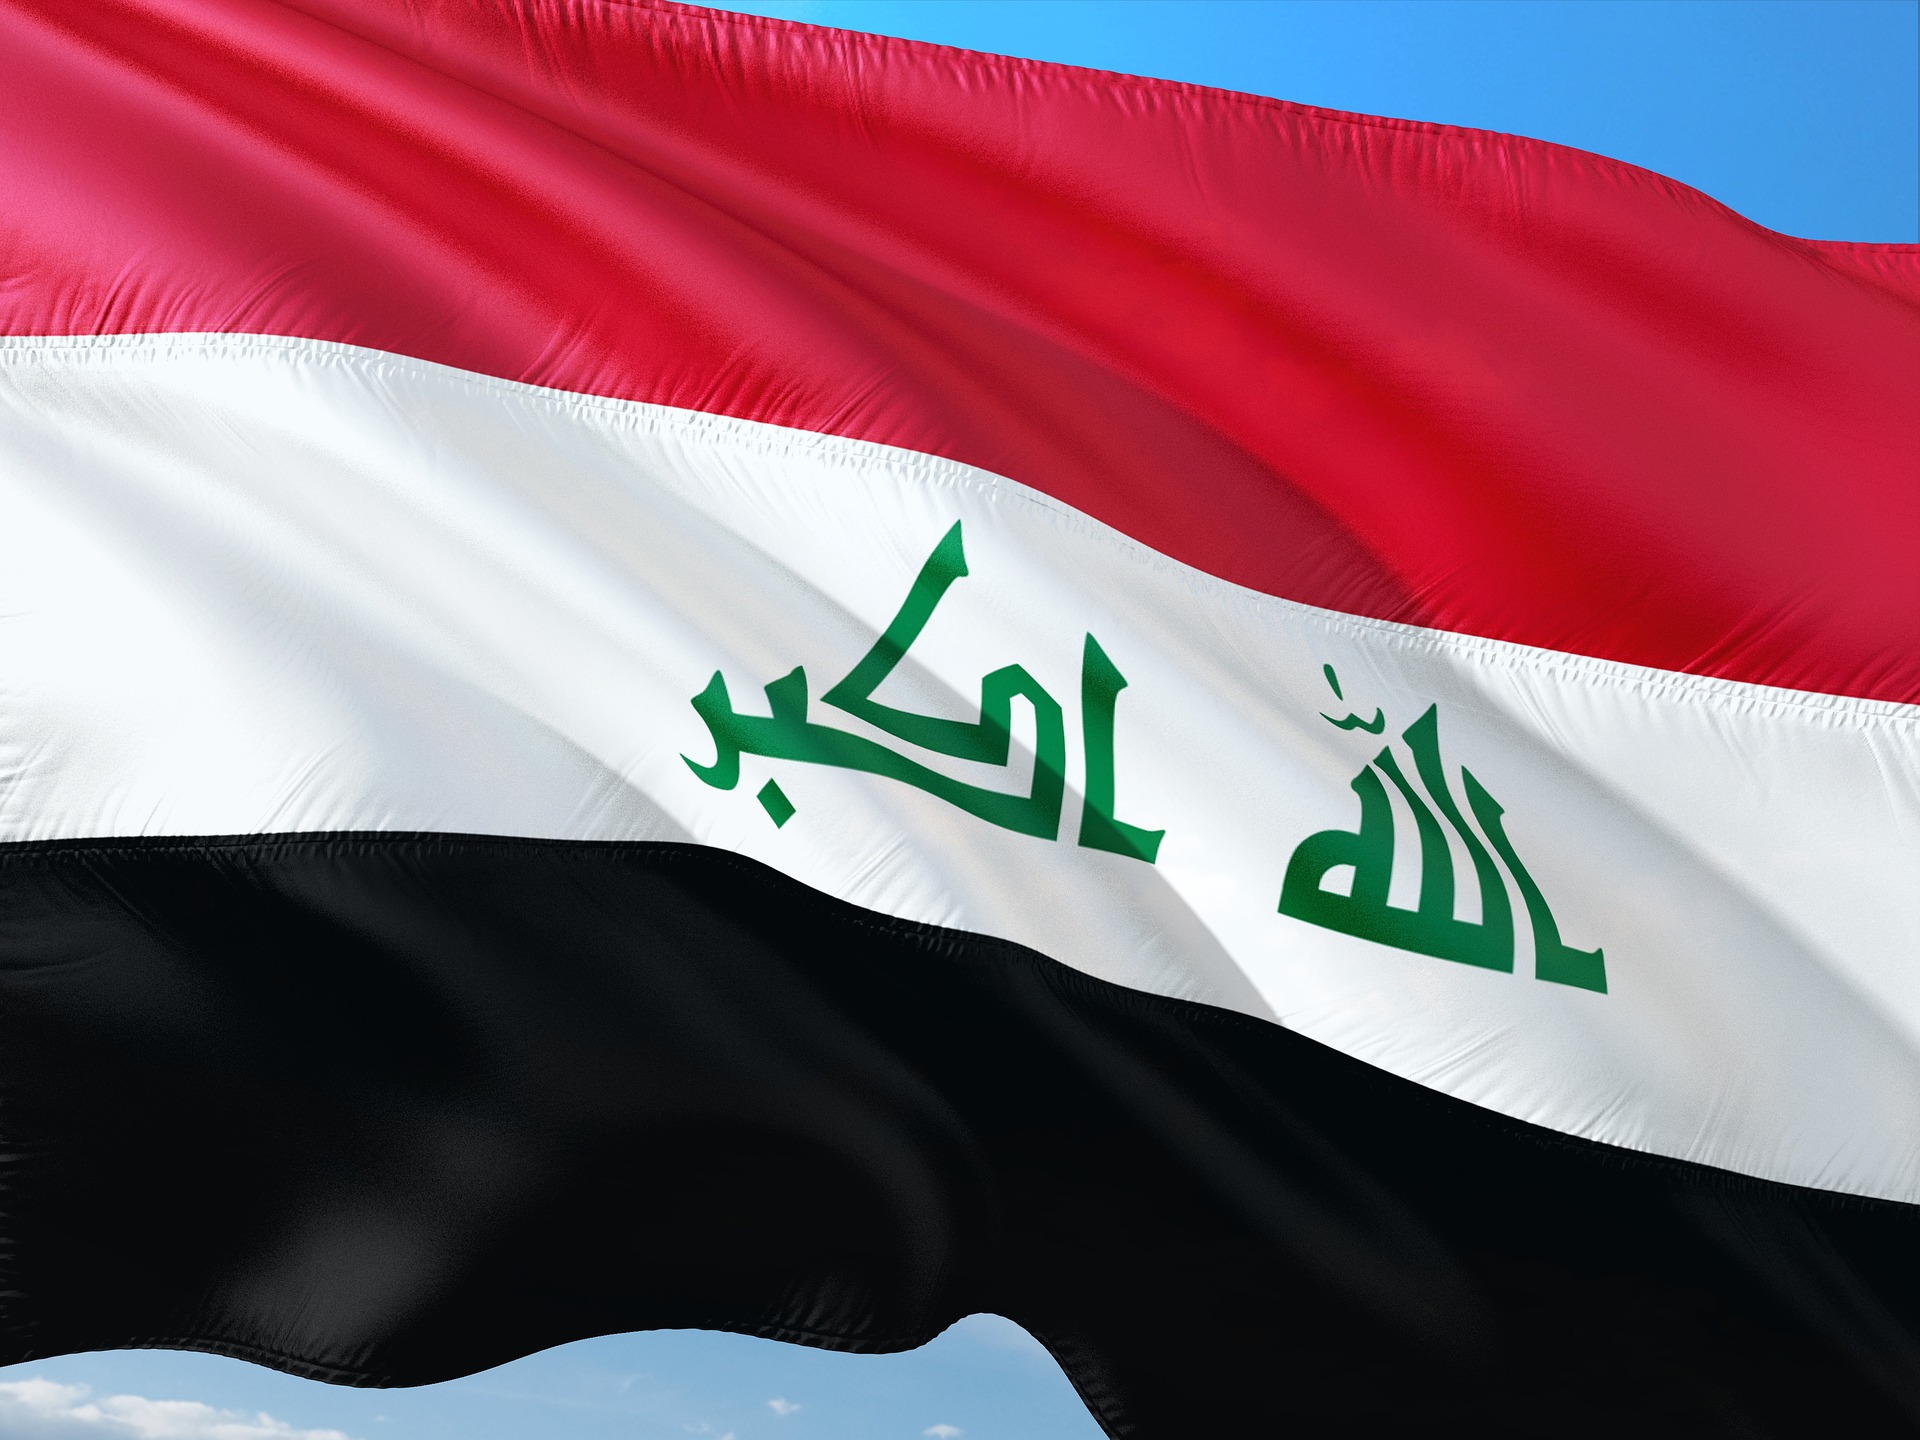 With Elections Approaching, a Better Future for Iraq?